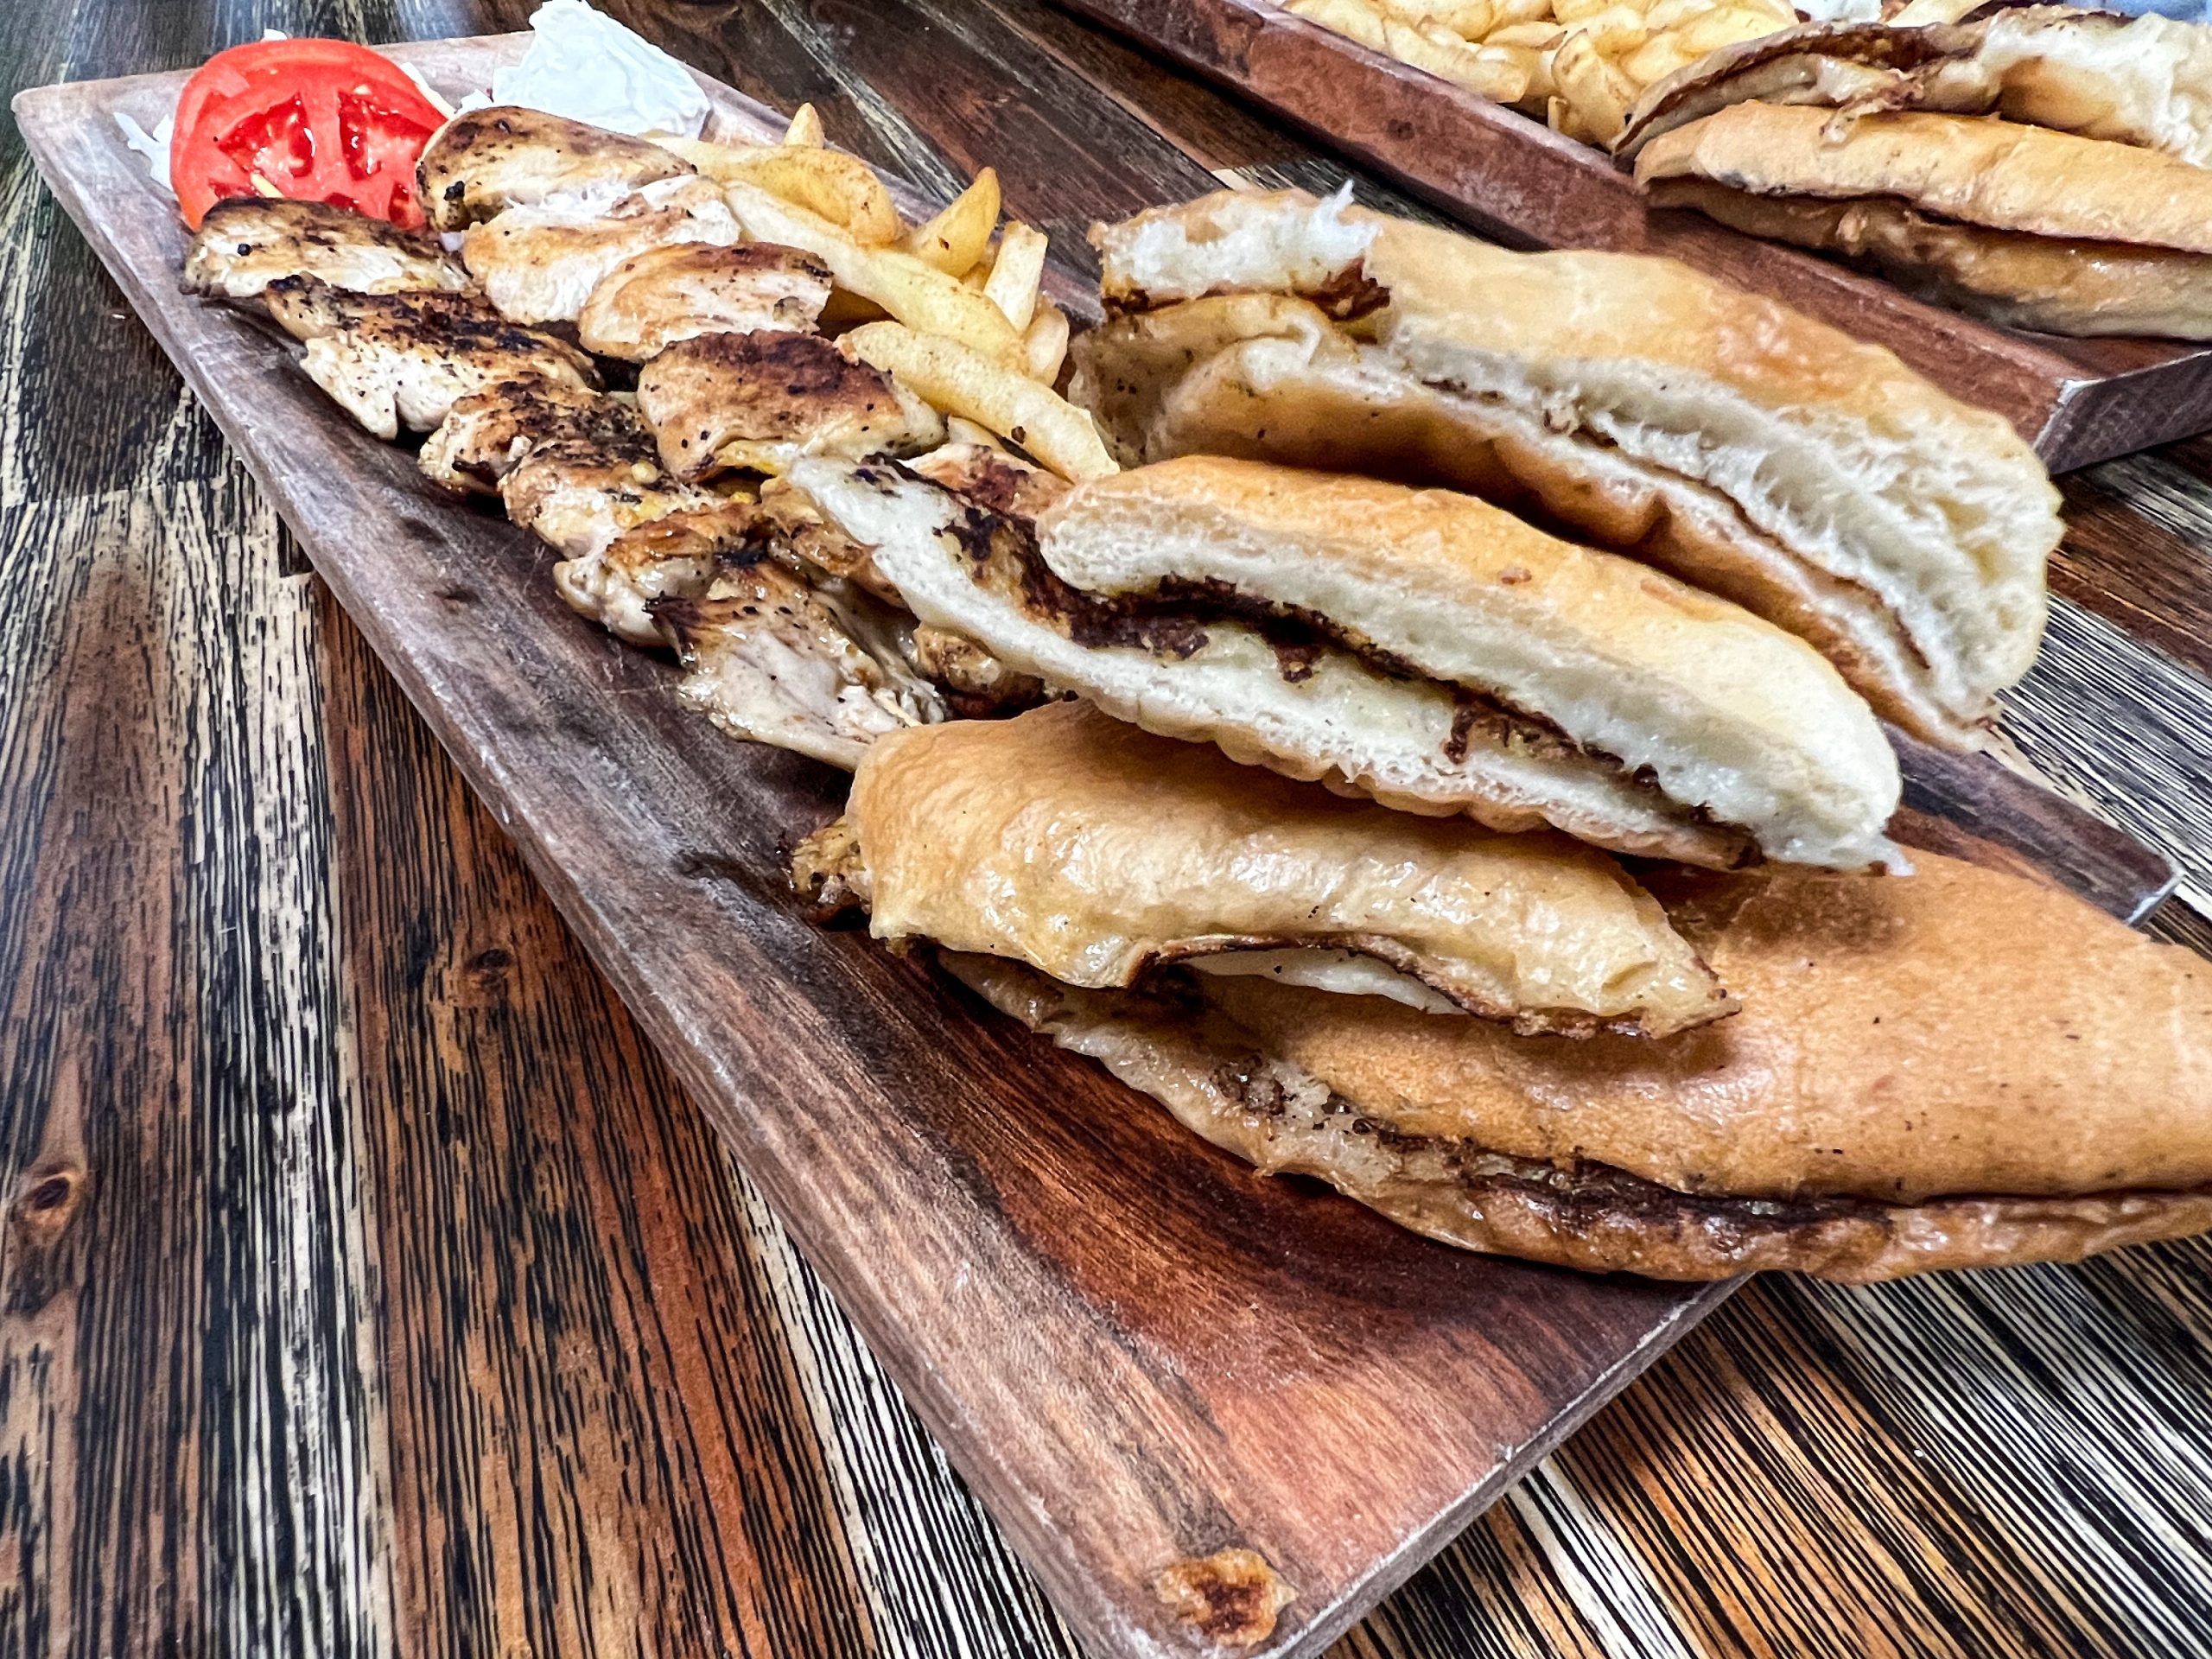 Most everything is served with a delicious traditional pita bread